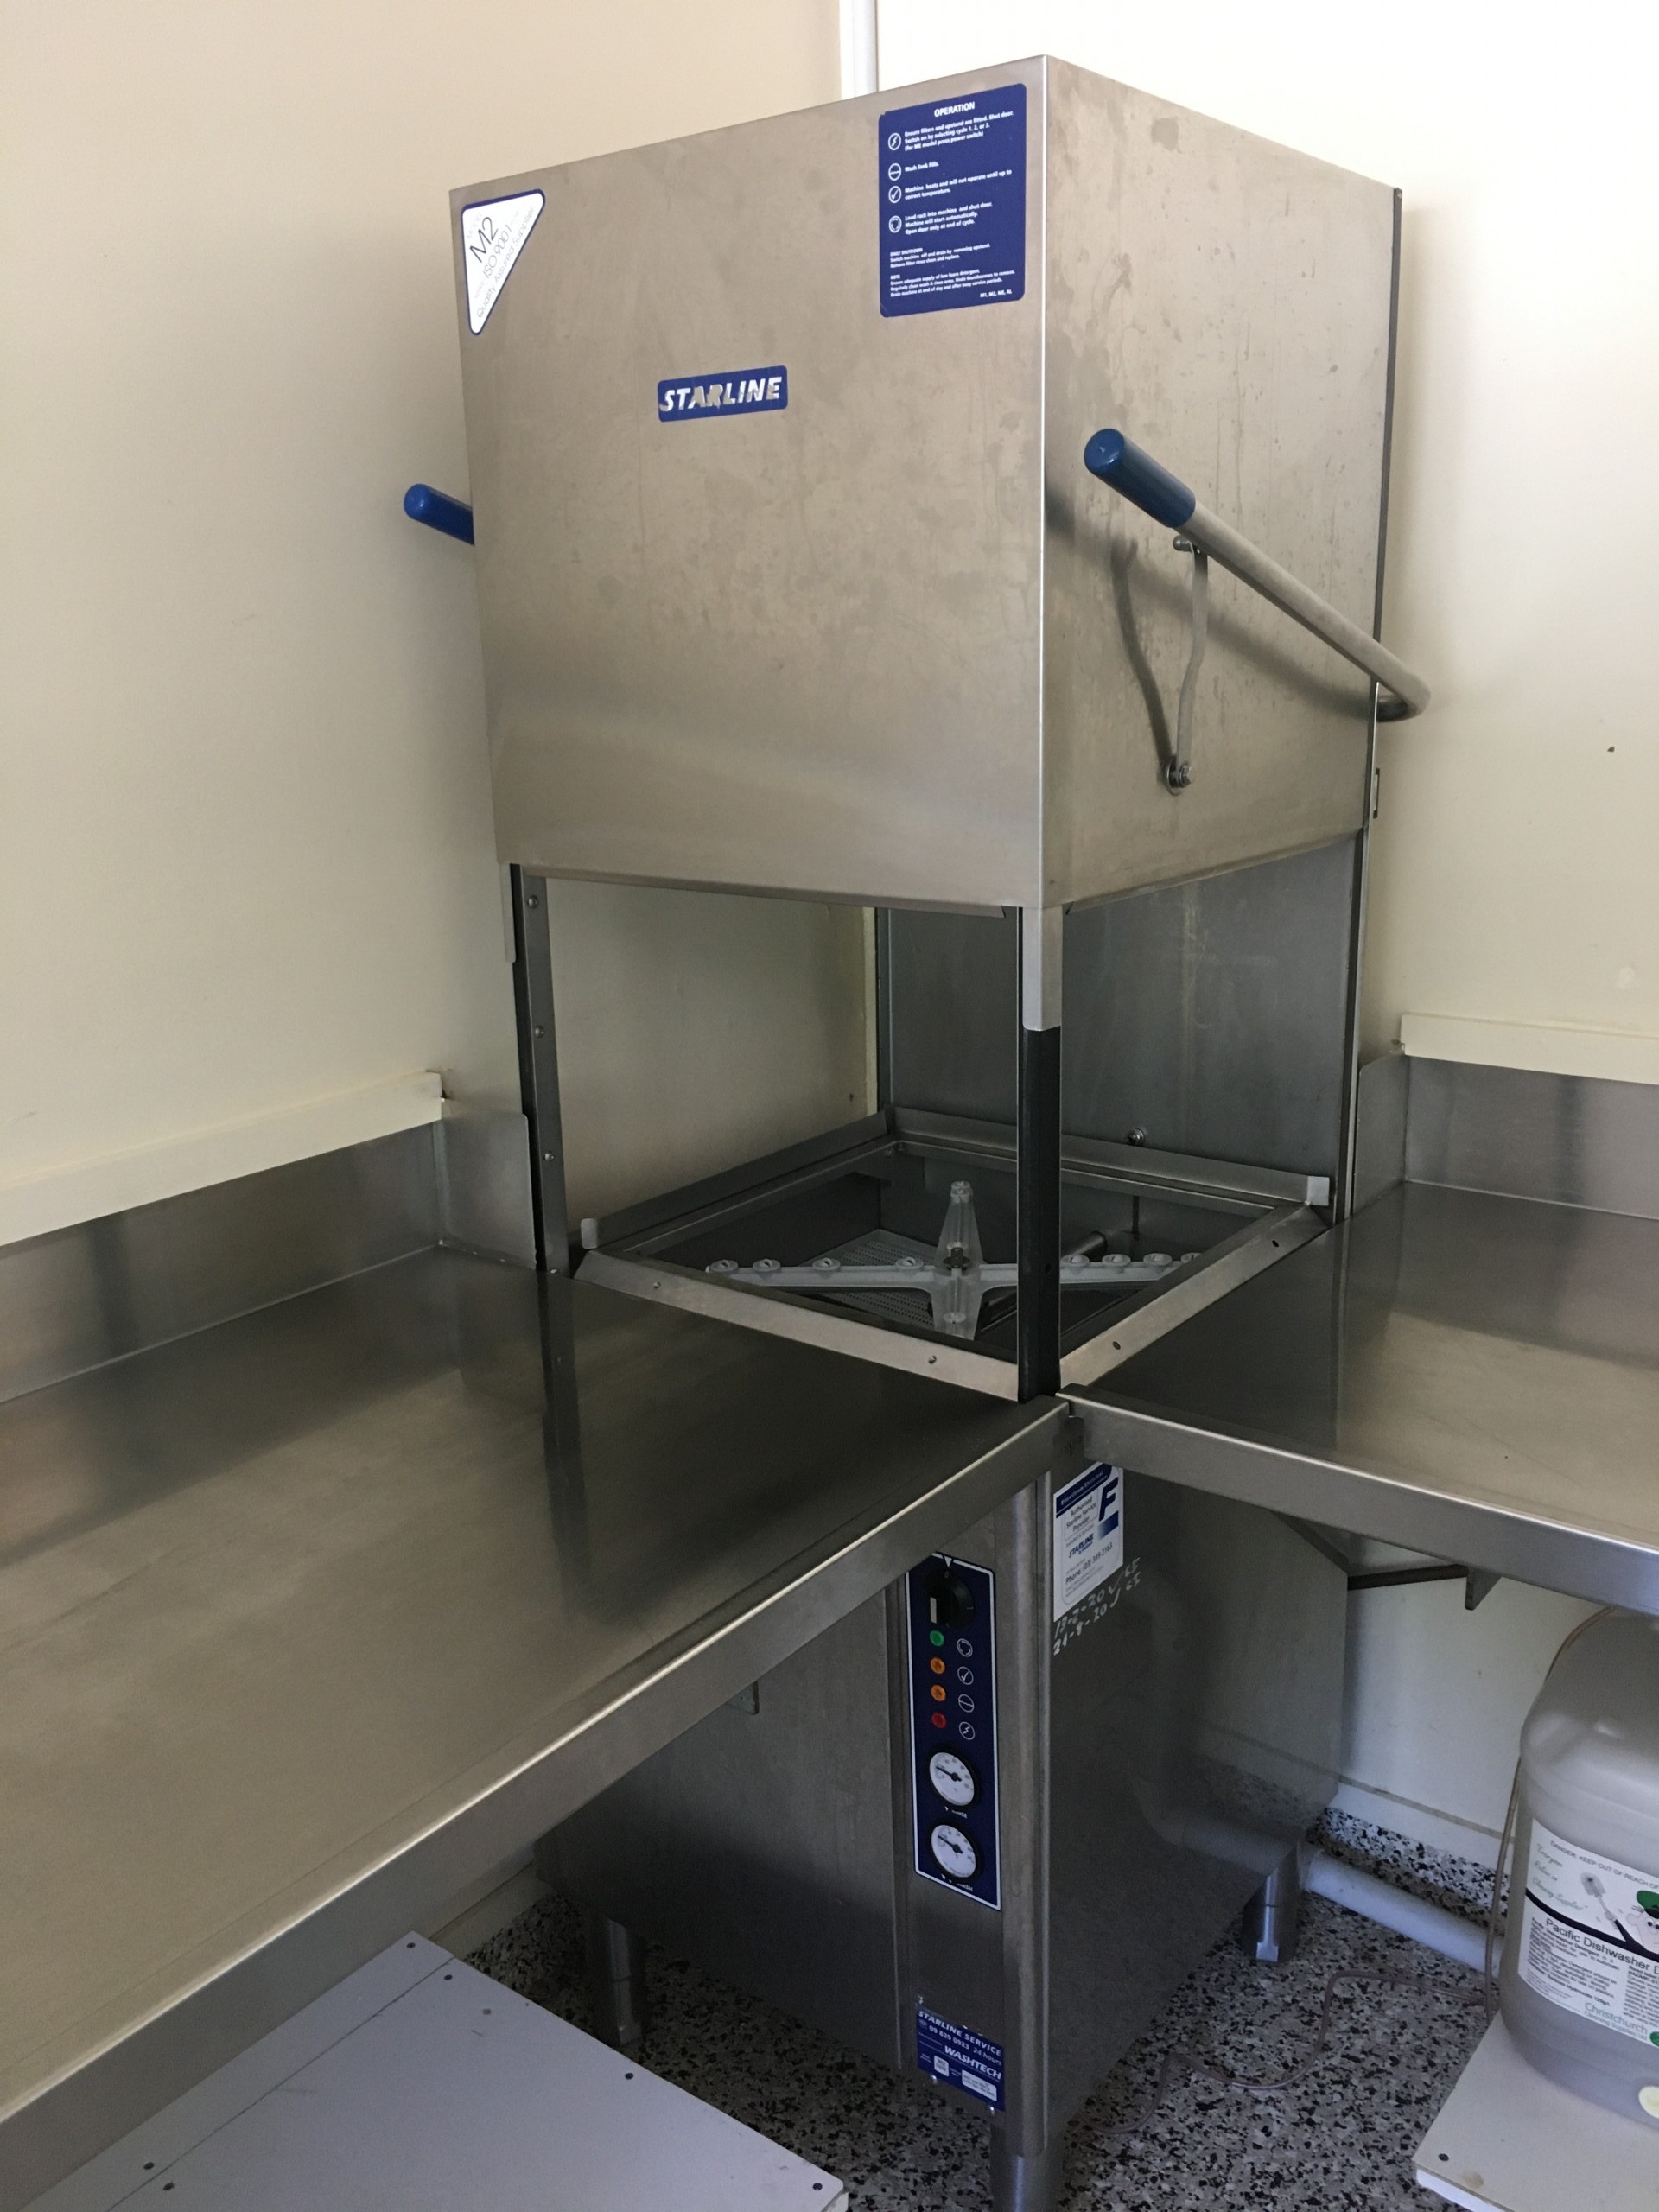 Commercial dishwasher in Scullery